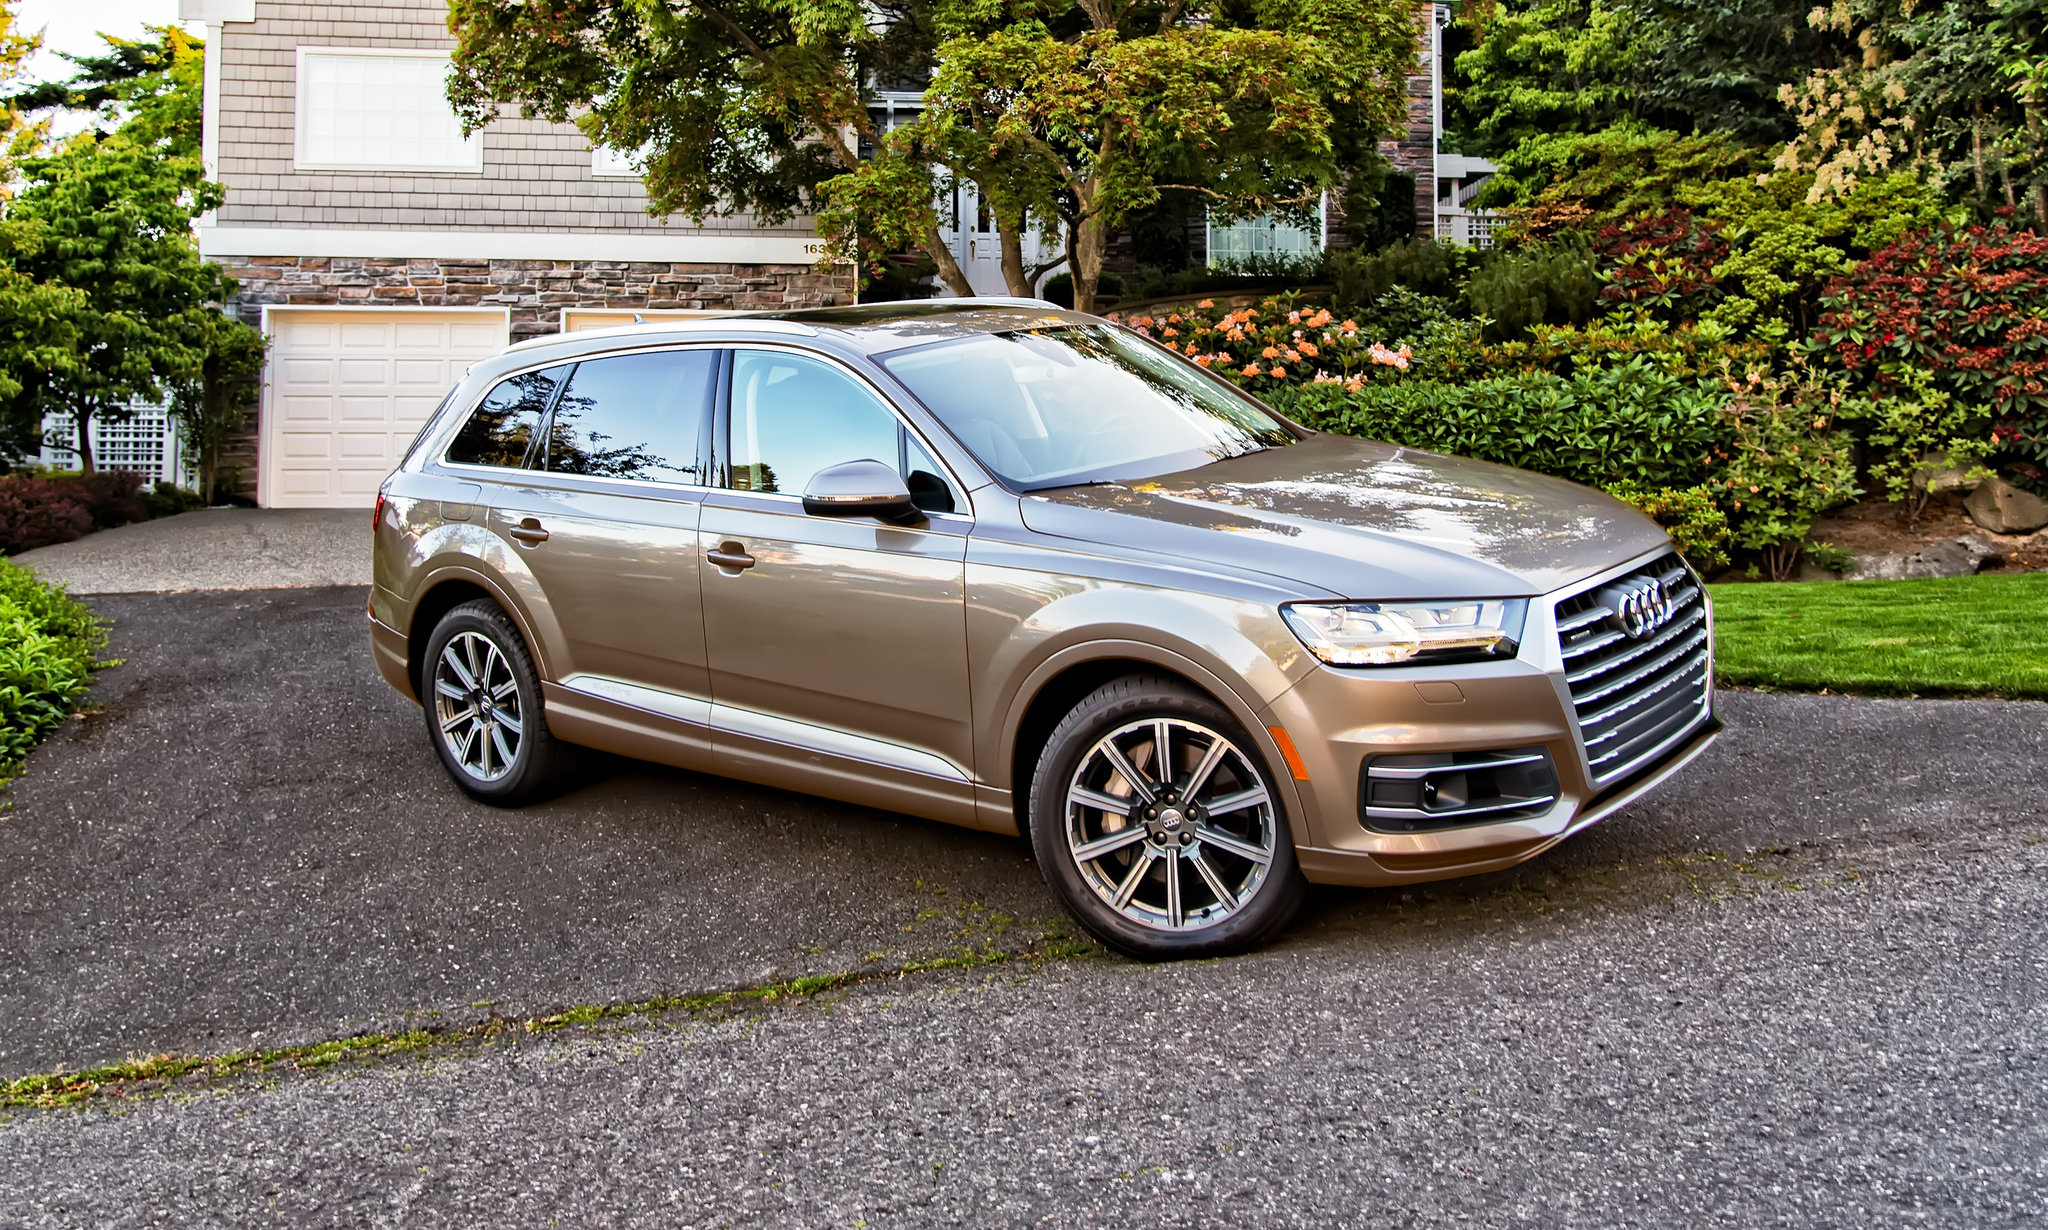 Video Review: The New Audi Q7 Drops to Fighting Weight - The New York Times